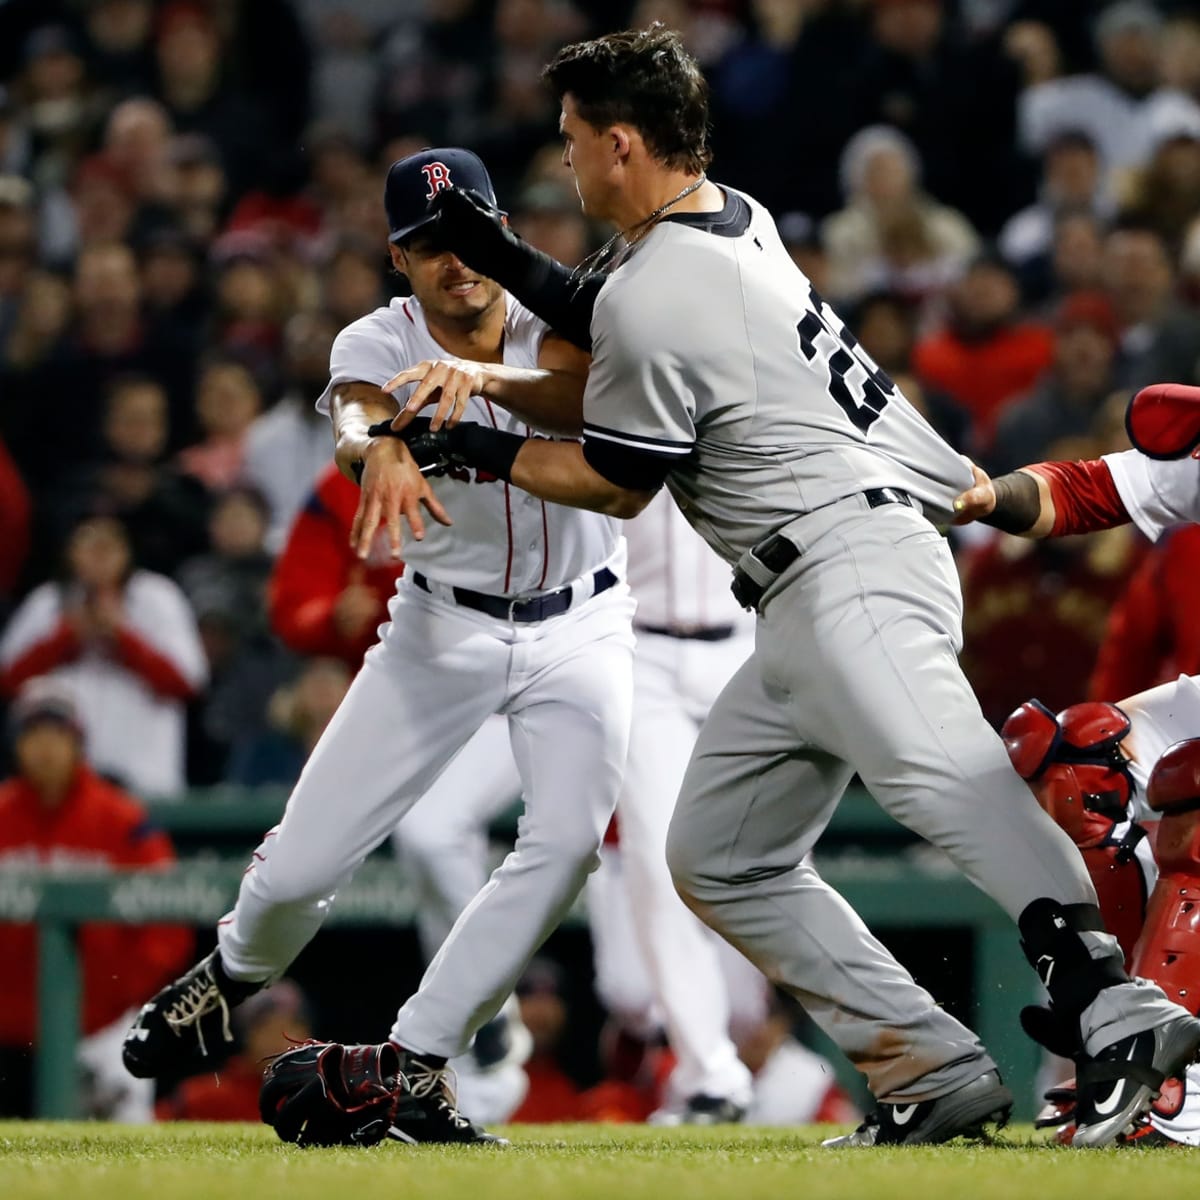 Judge vs. Betts the new rivalry within Red Sox-Yankees rivalry